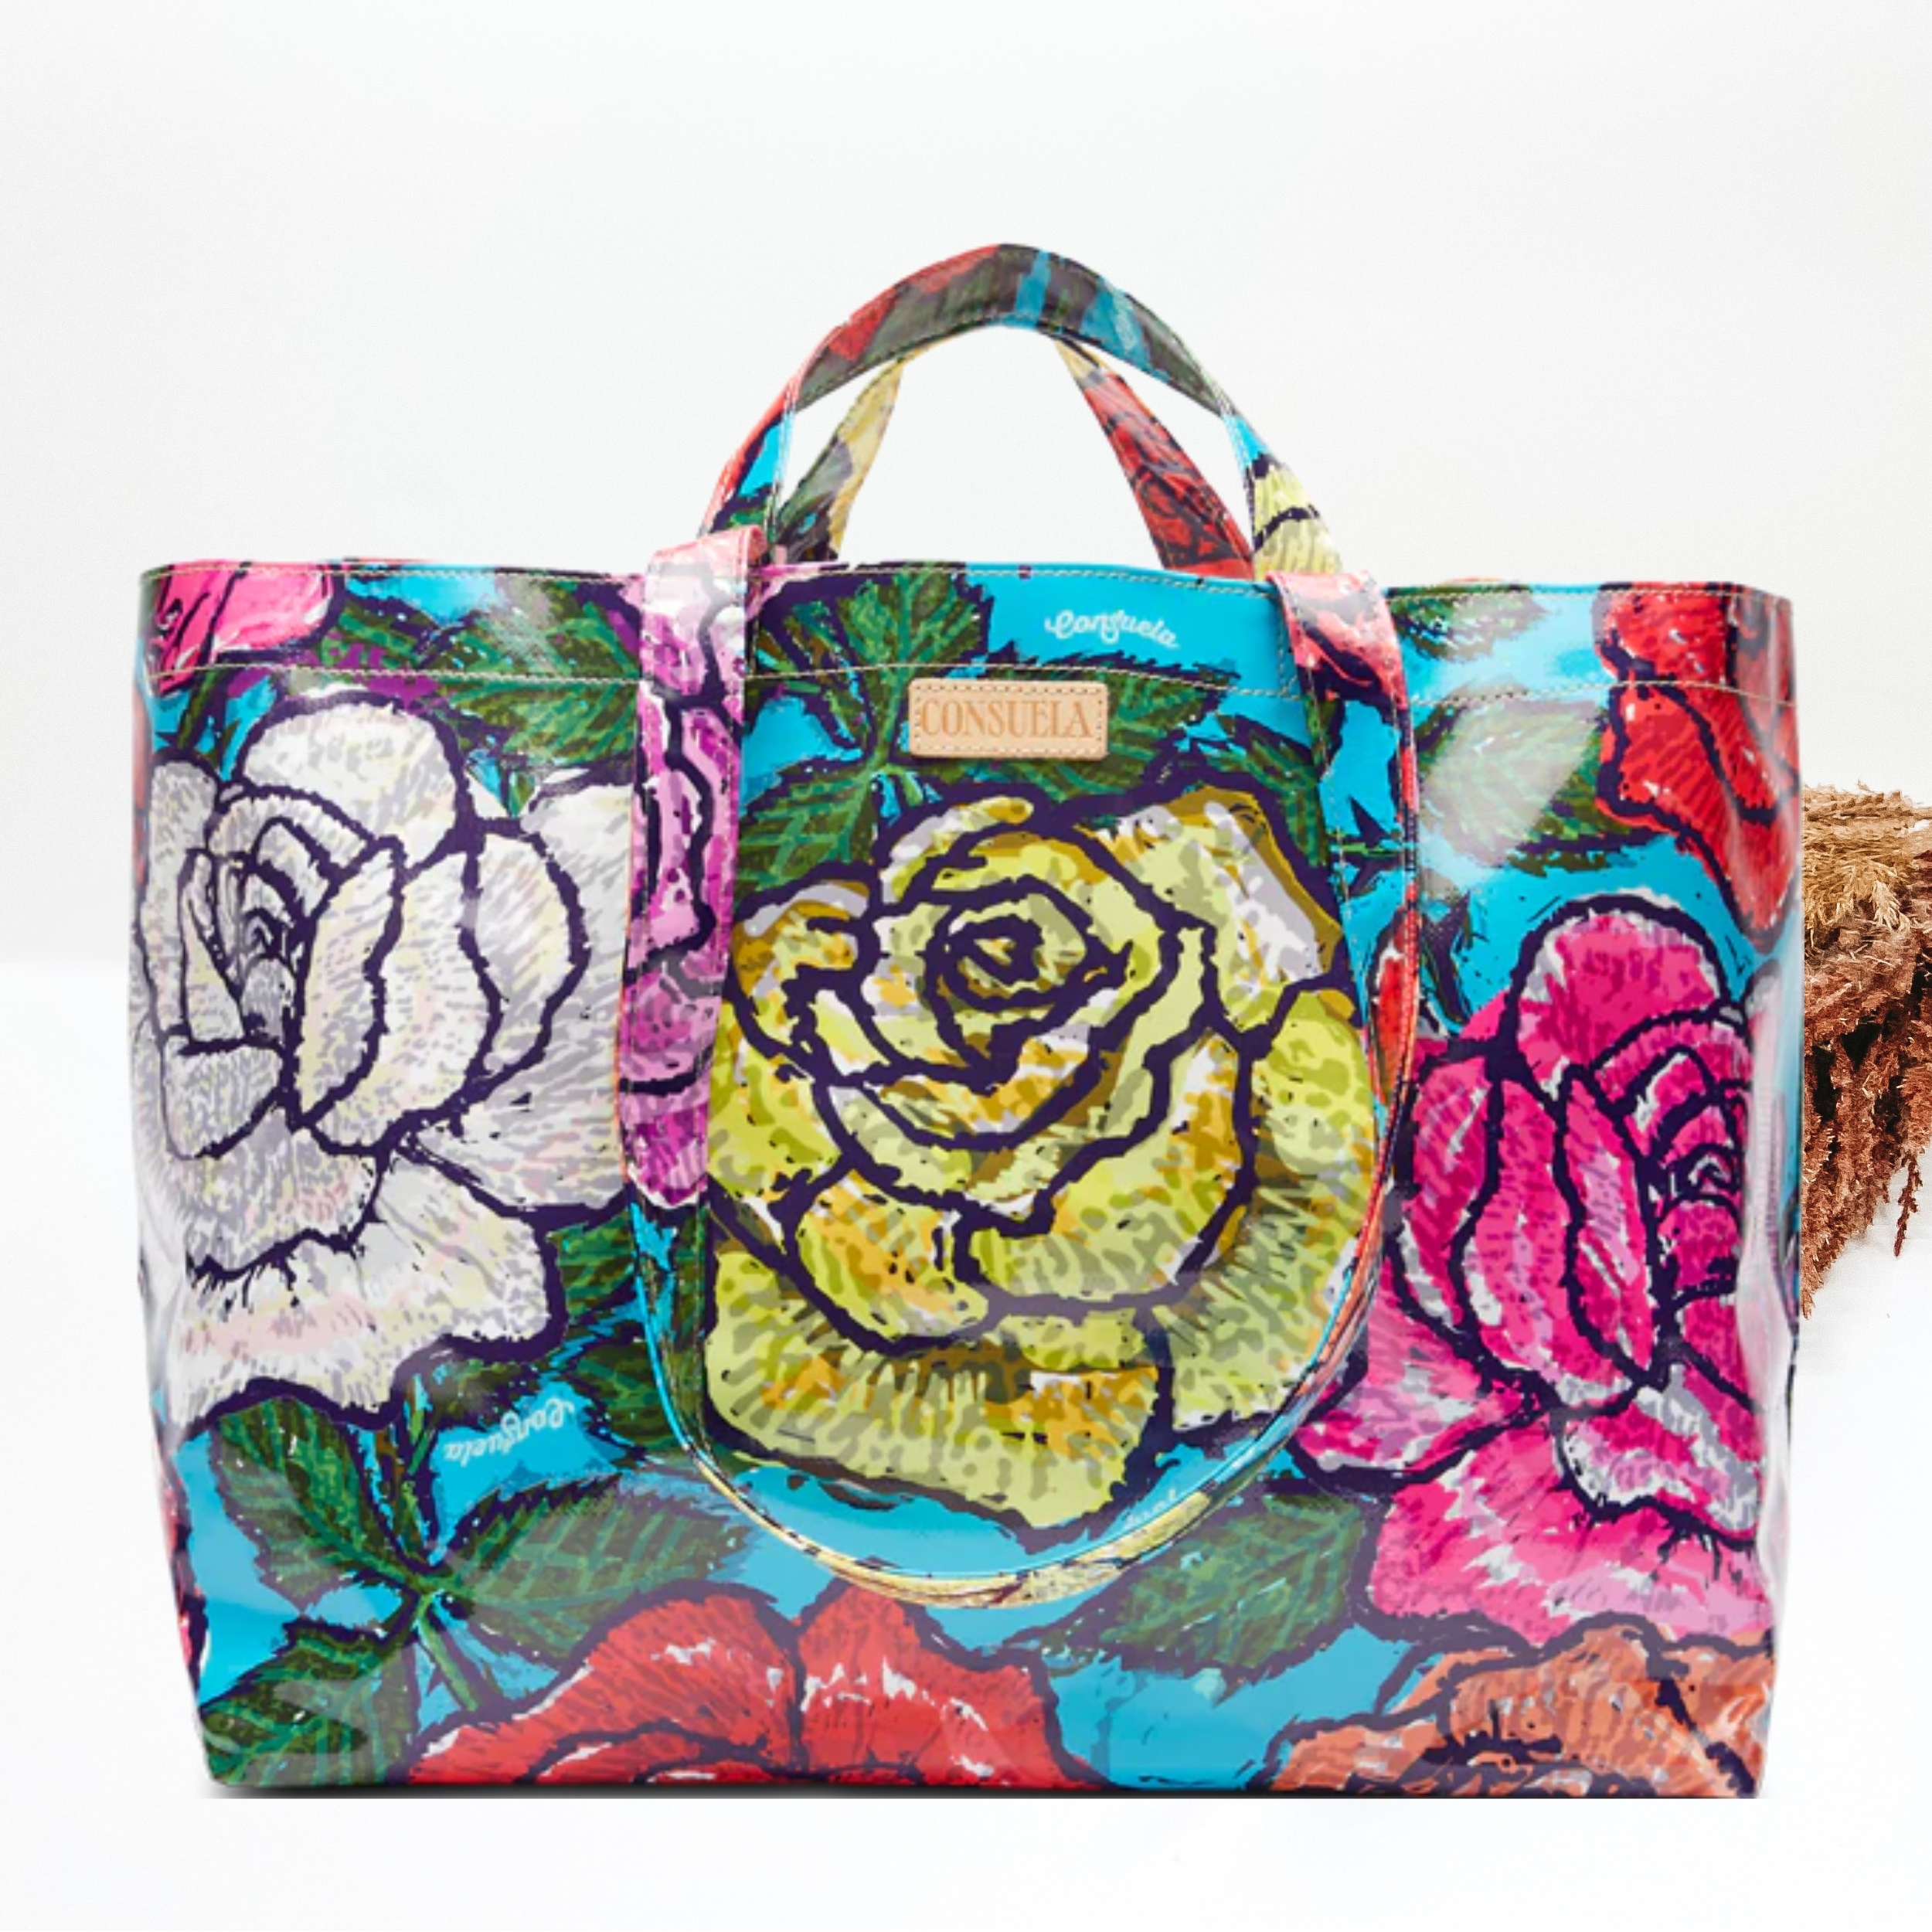 Pictured partially on a white background is a blue bag with a multicolor rose design with green leaves.  